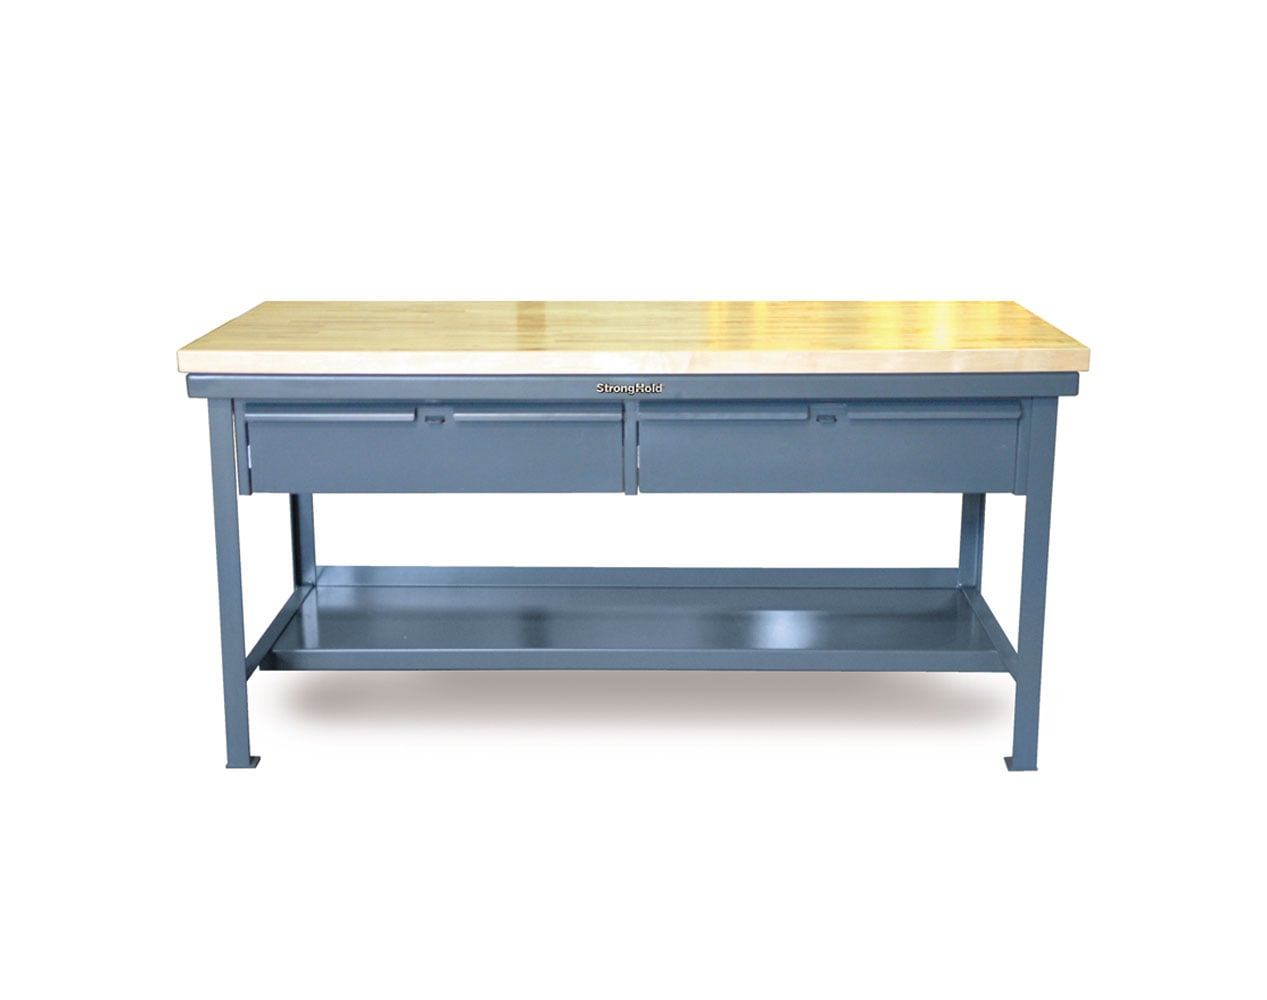 Extreme Duty 7 GA Shop Table with 1 3/4 in. Maple Top, 2 Drawers, 1 Shelf - 84 In. W x 36 In. D x 34 In. H